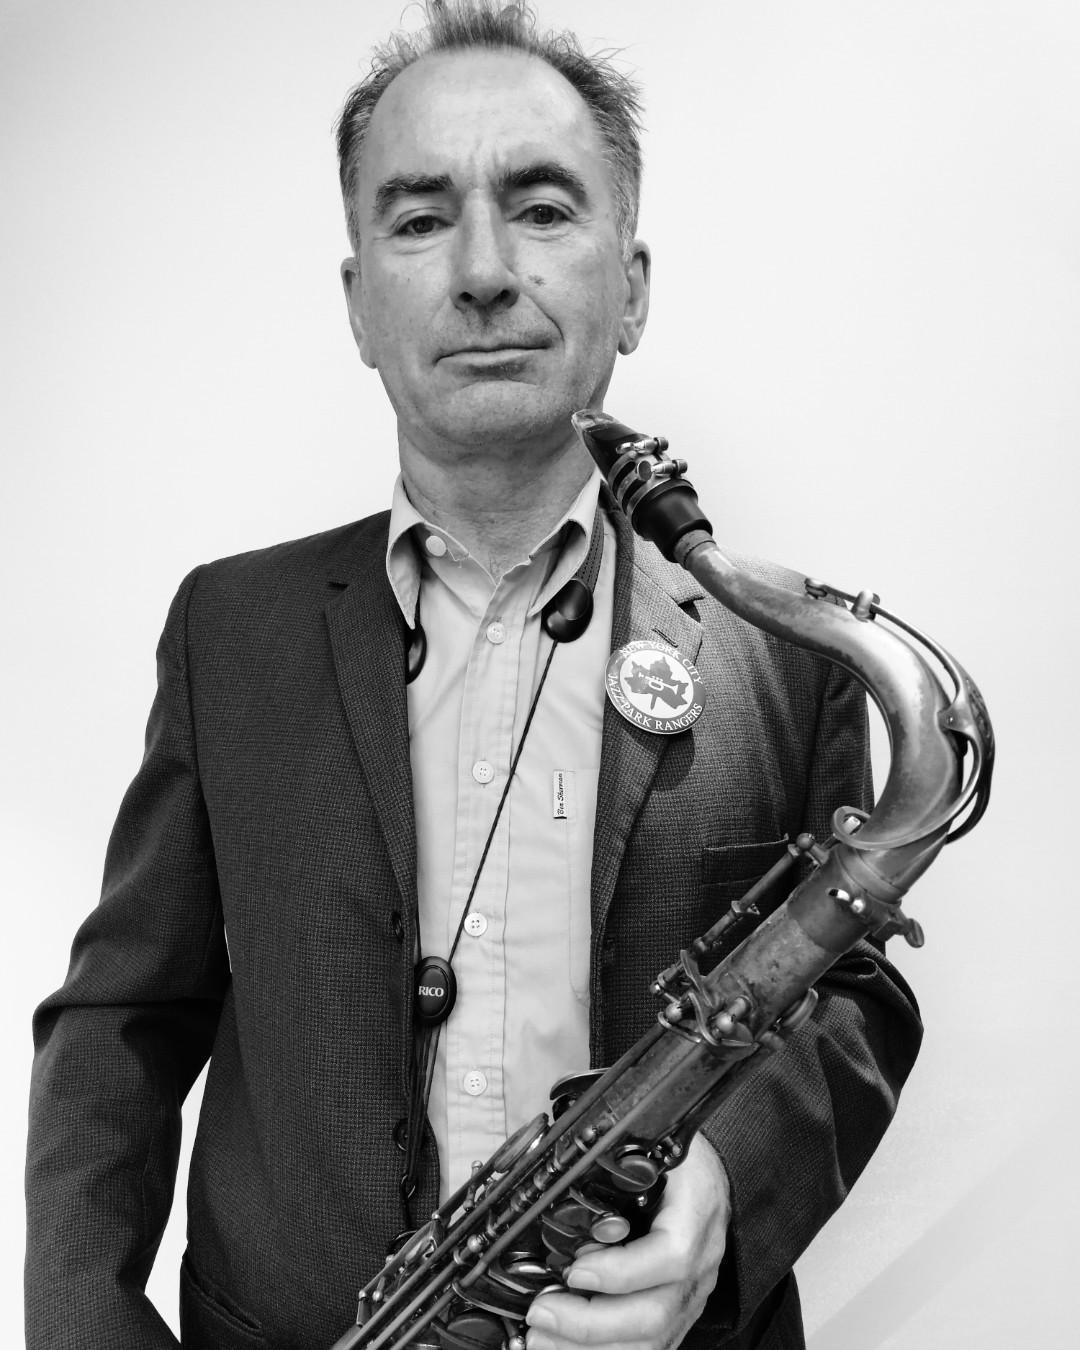 Jazz Music Institute - Graeme Norris returns to the JMI Live stage this Thursday